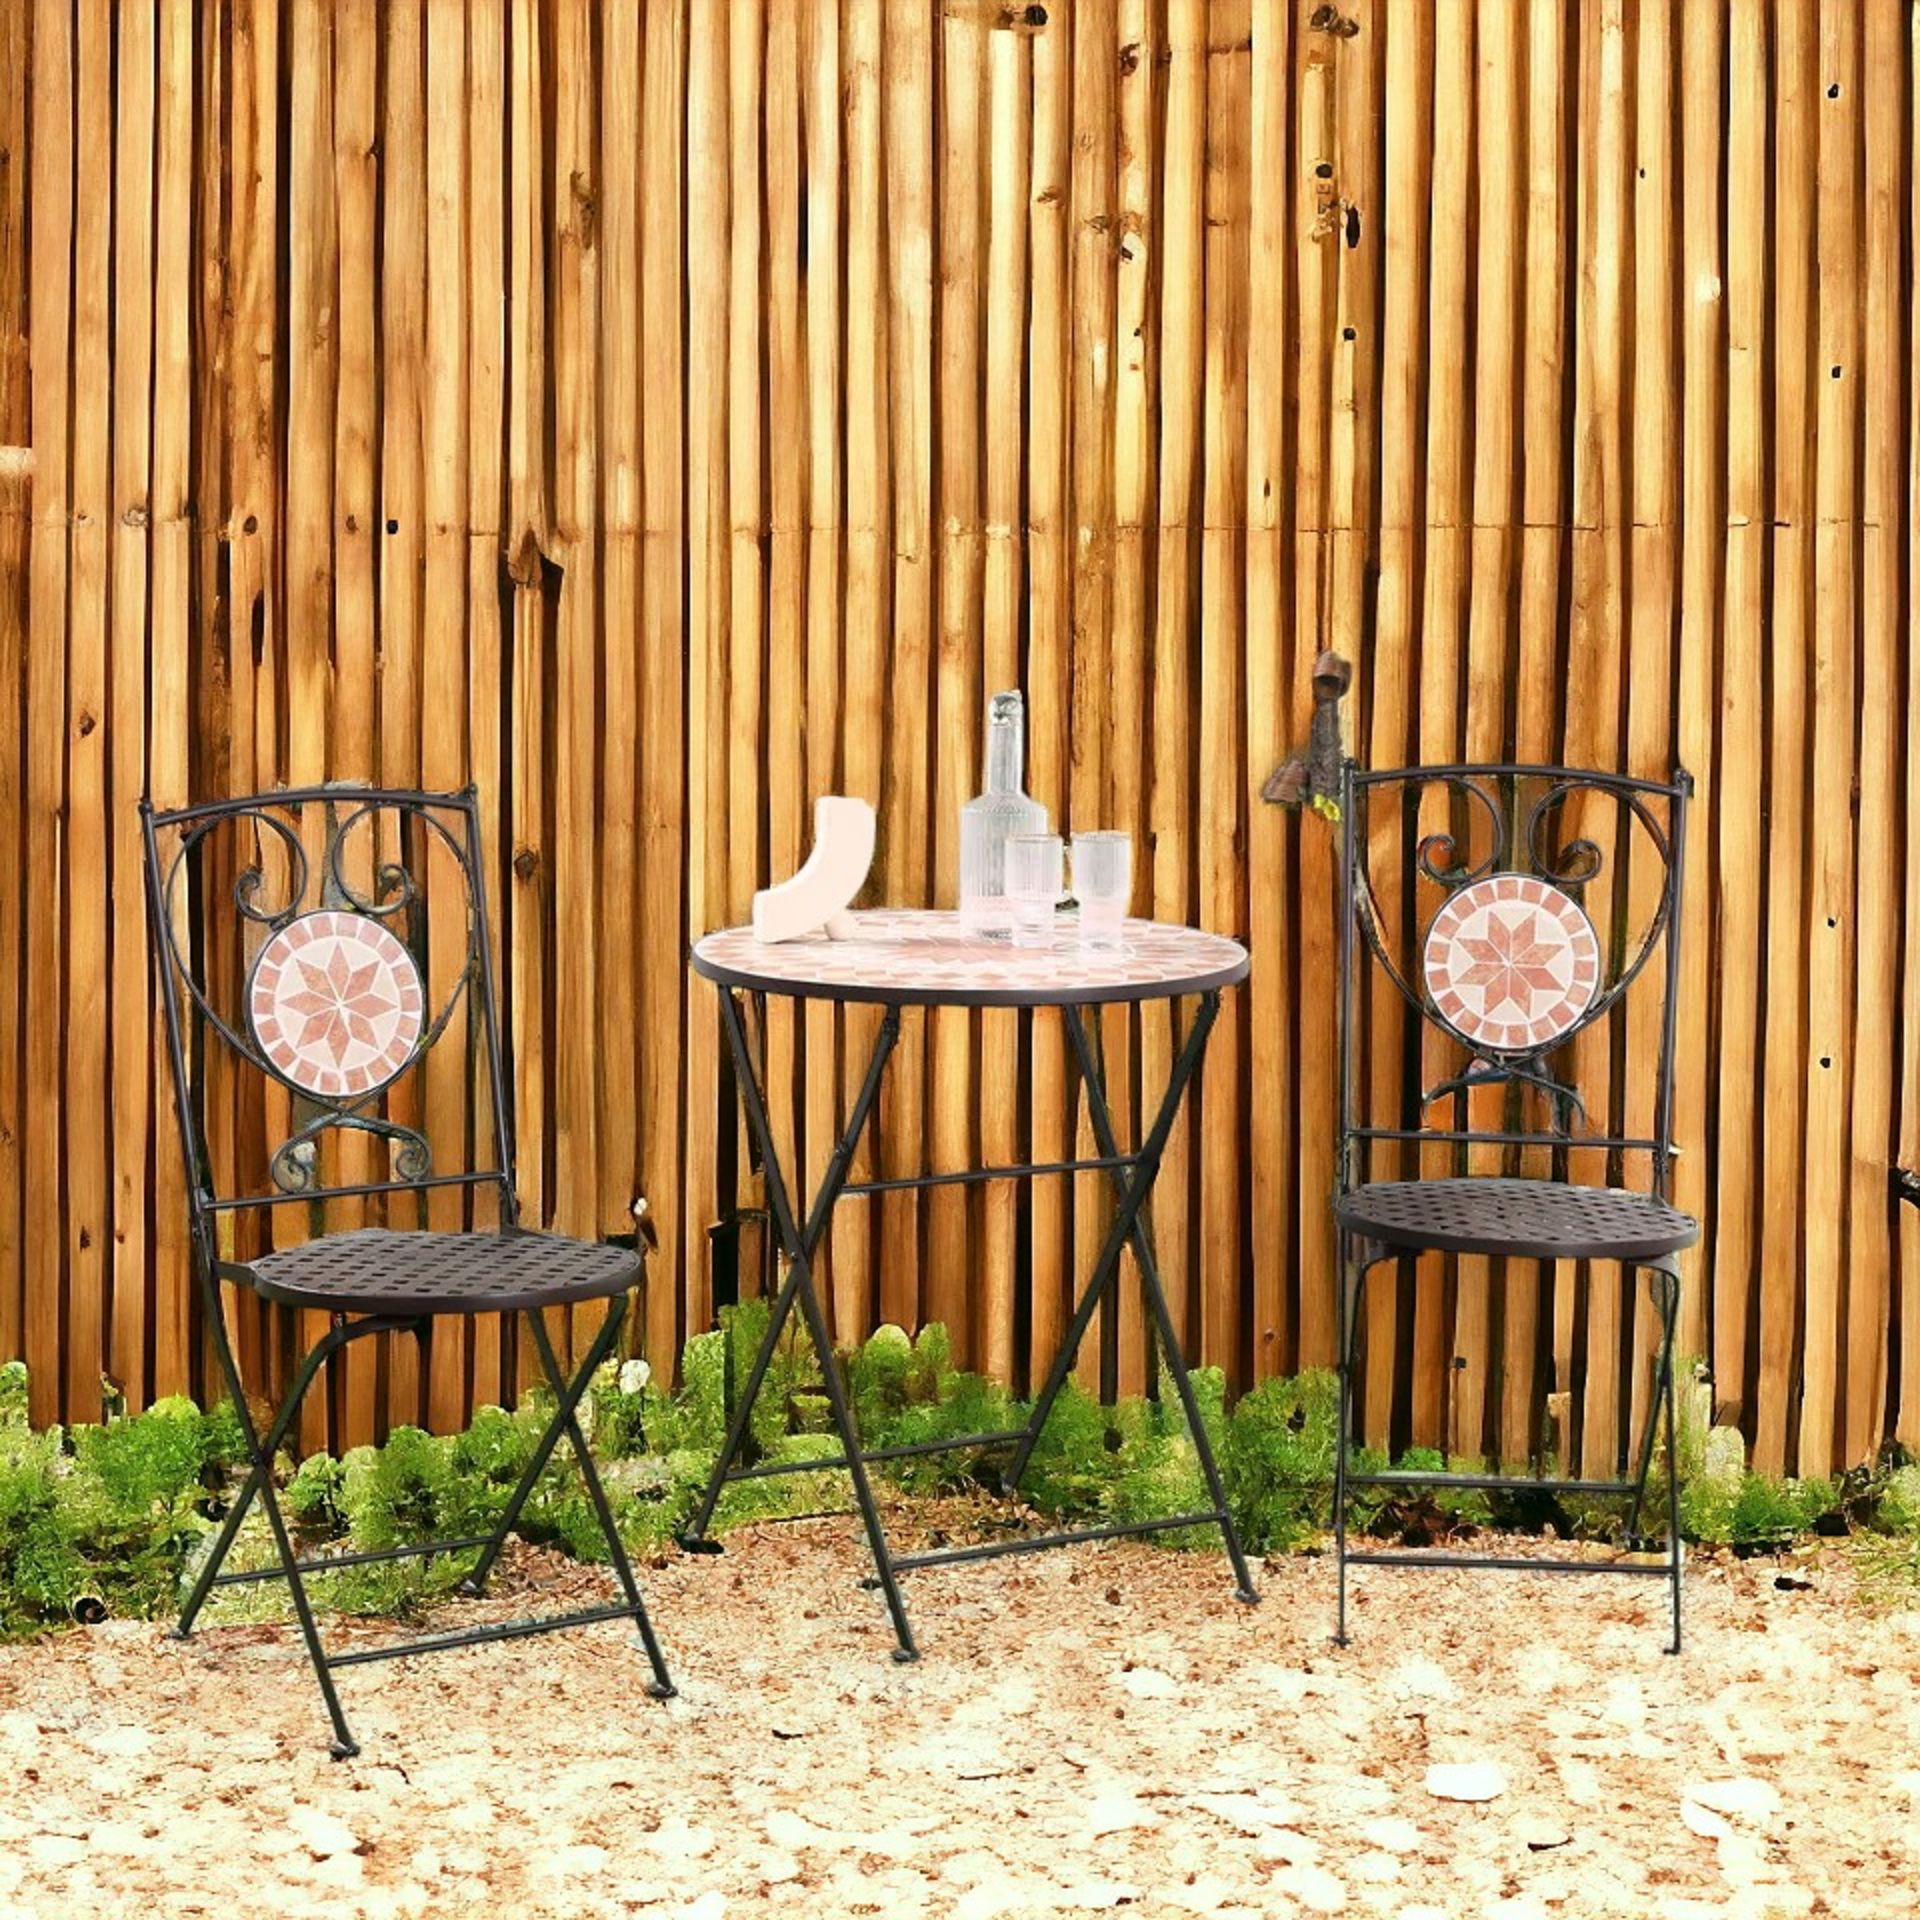 FREE DELIVERY-BRAND NEW 3-PIECE OUTDOOR BISTRO SET W/ MOSAIC ROUND TABLE AND 2 ARMLESS CHAIRS - Image 2 of 2